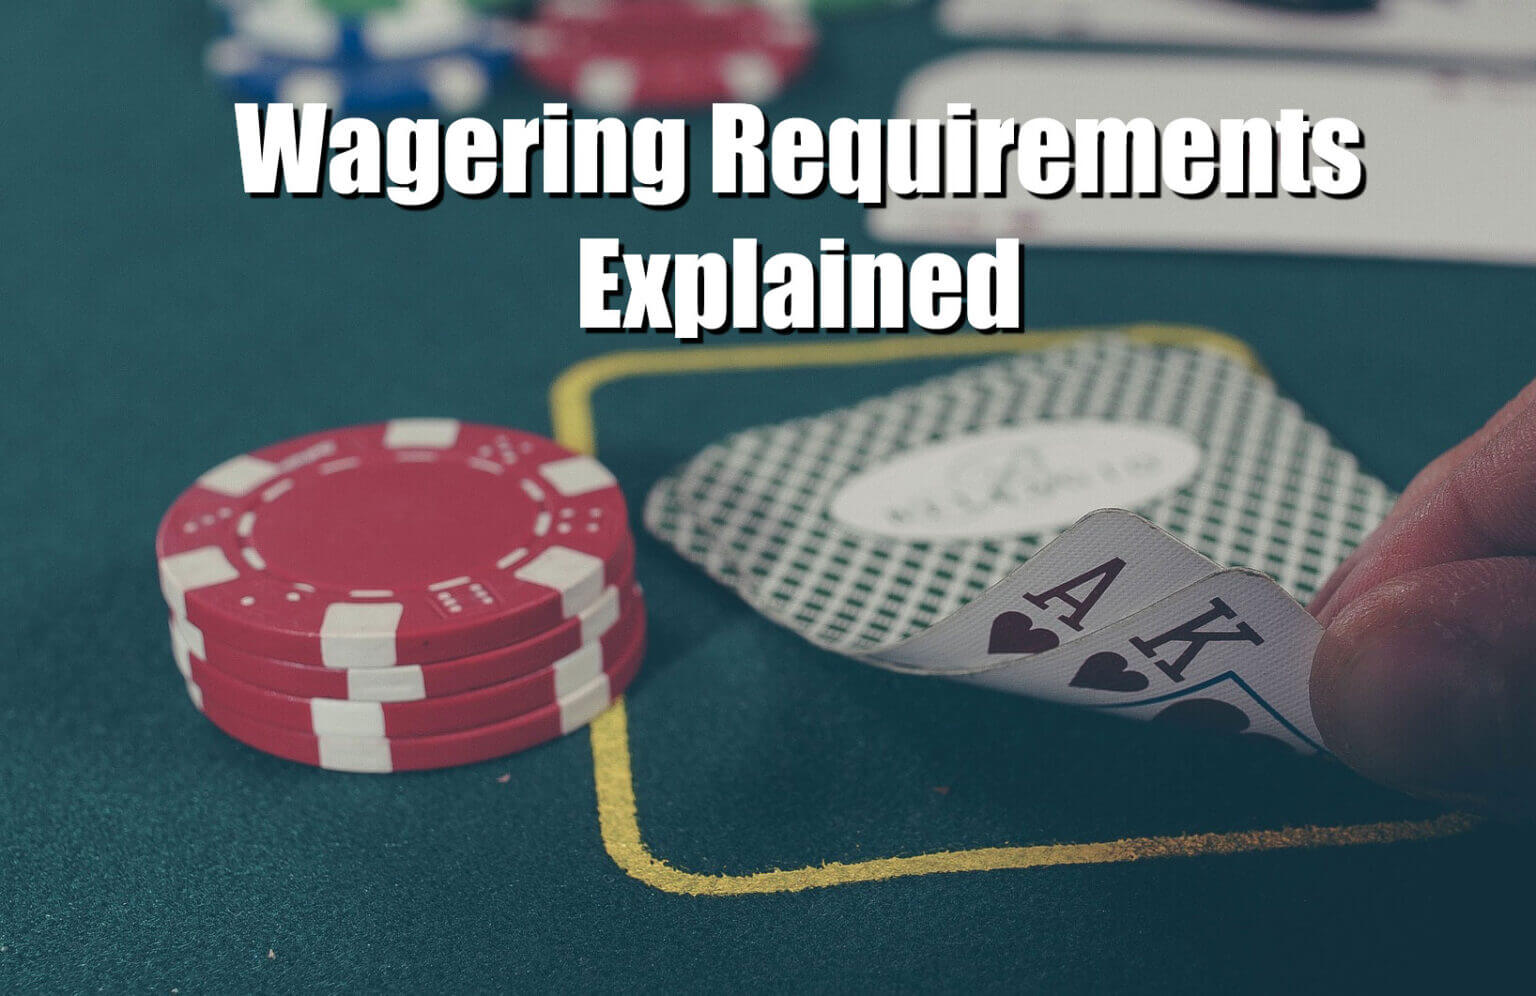 Wagering Requirements for USA Players Explained by Hypercasinos.com